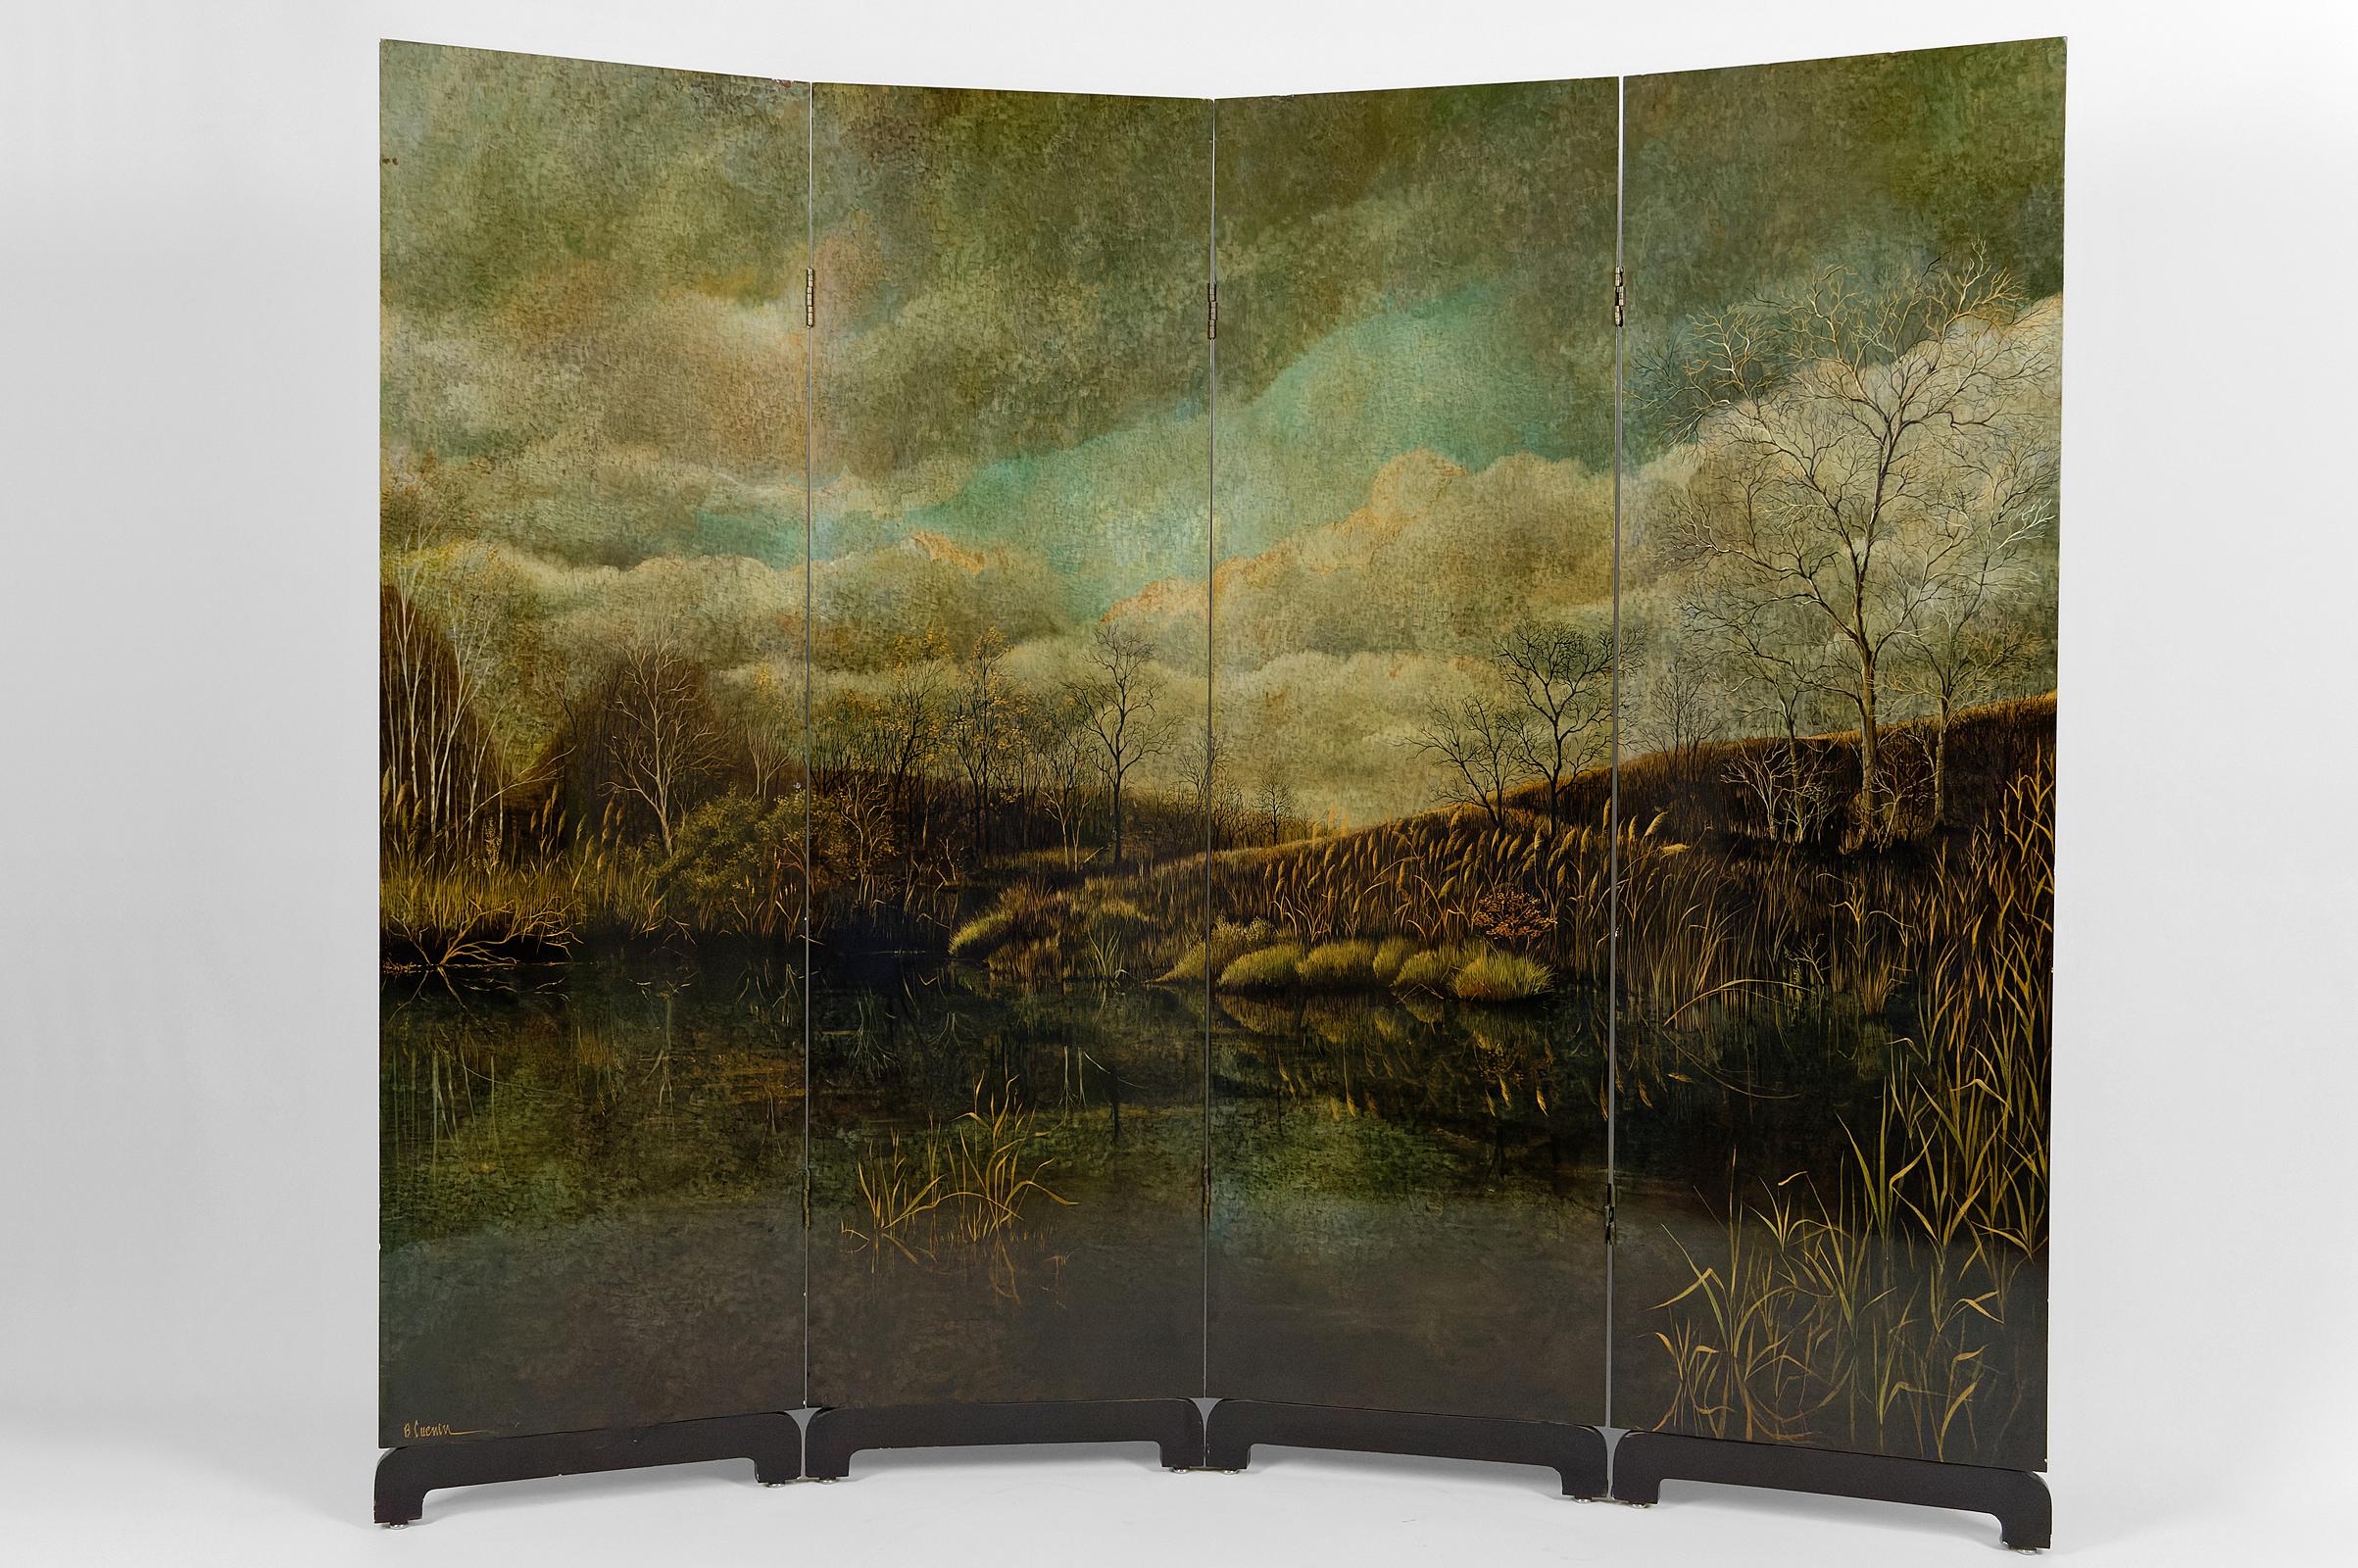 Amazing folding screen with 4 leaves / panels in lacquered and painted wood.
The painting represents a winter lake landscape: we see the shore of a marshy pond, covered with various vegetation (trees, reeds, ferns) under a cloudy sky.

Very good